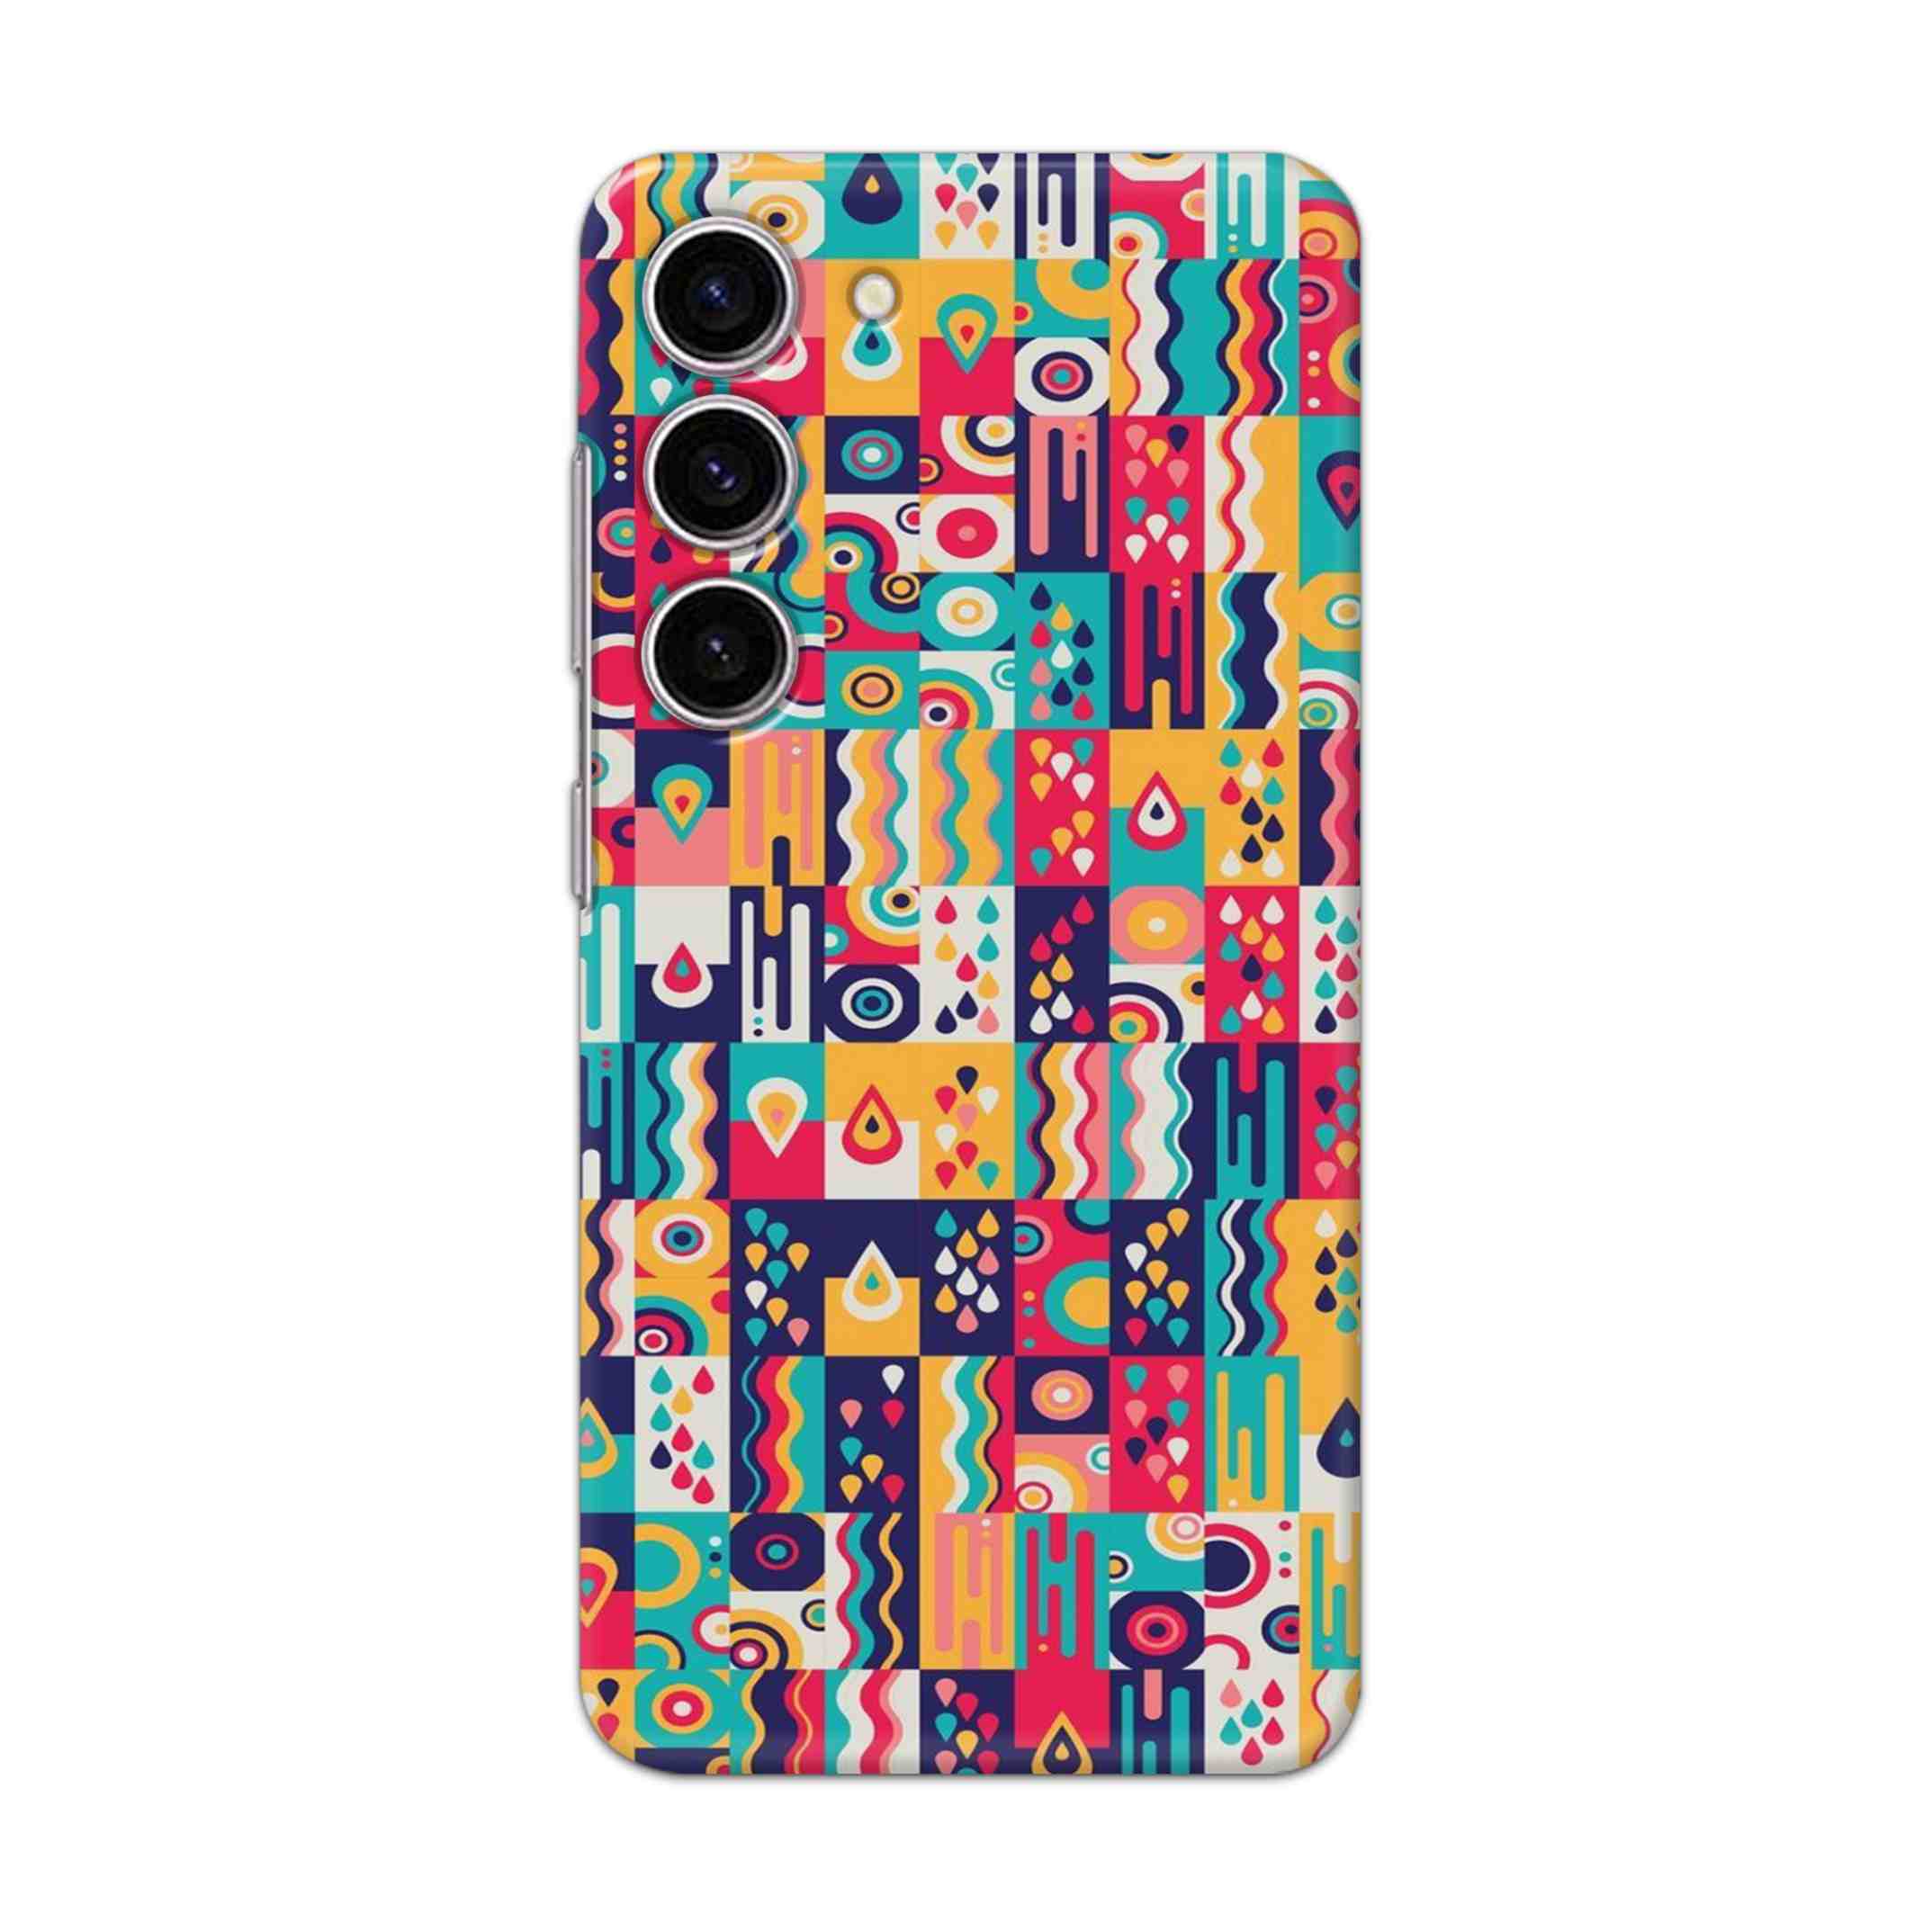 Buy Art Hard Back Mobile Phone Case/Cover For Samsung Galaxy S23 Plus Online